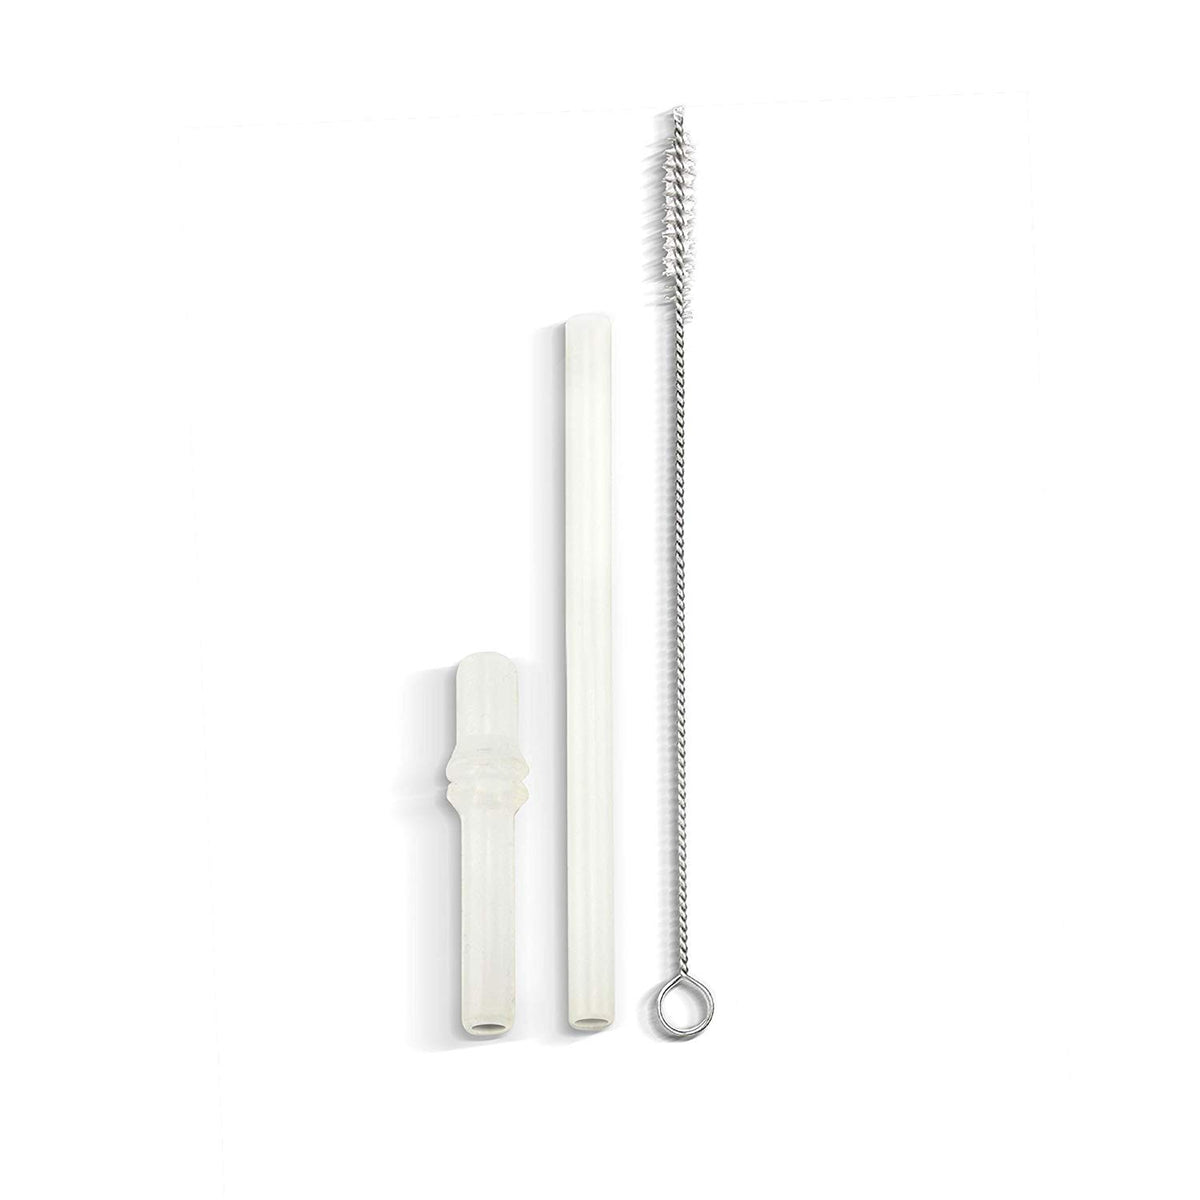 4 NEW Rubbermaid Littlerless Juice Box Replacement Straws for #3115 #3117  #1B42